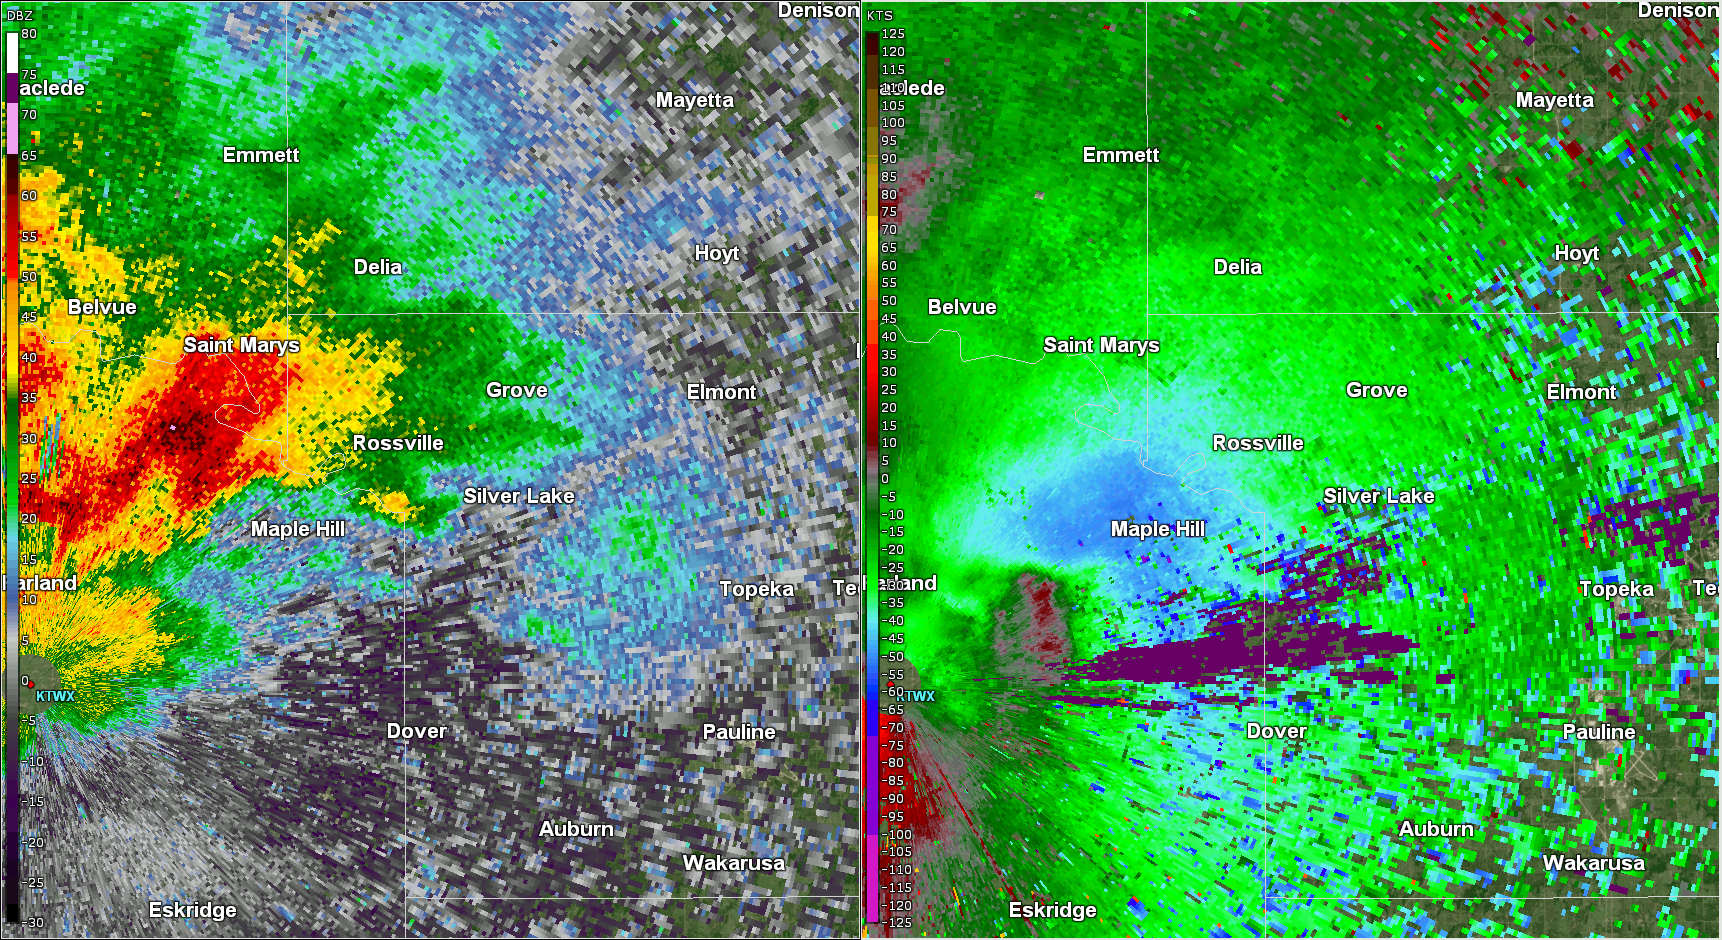 Radar reflectivity and storm relative velocity for the storm in northwest Shawnee and southern Jackson Counties